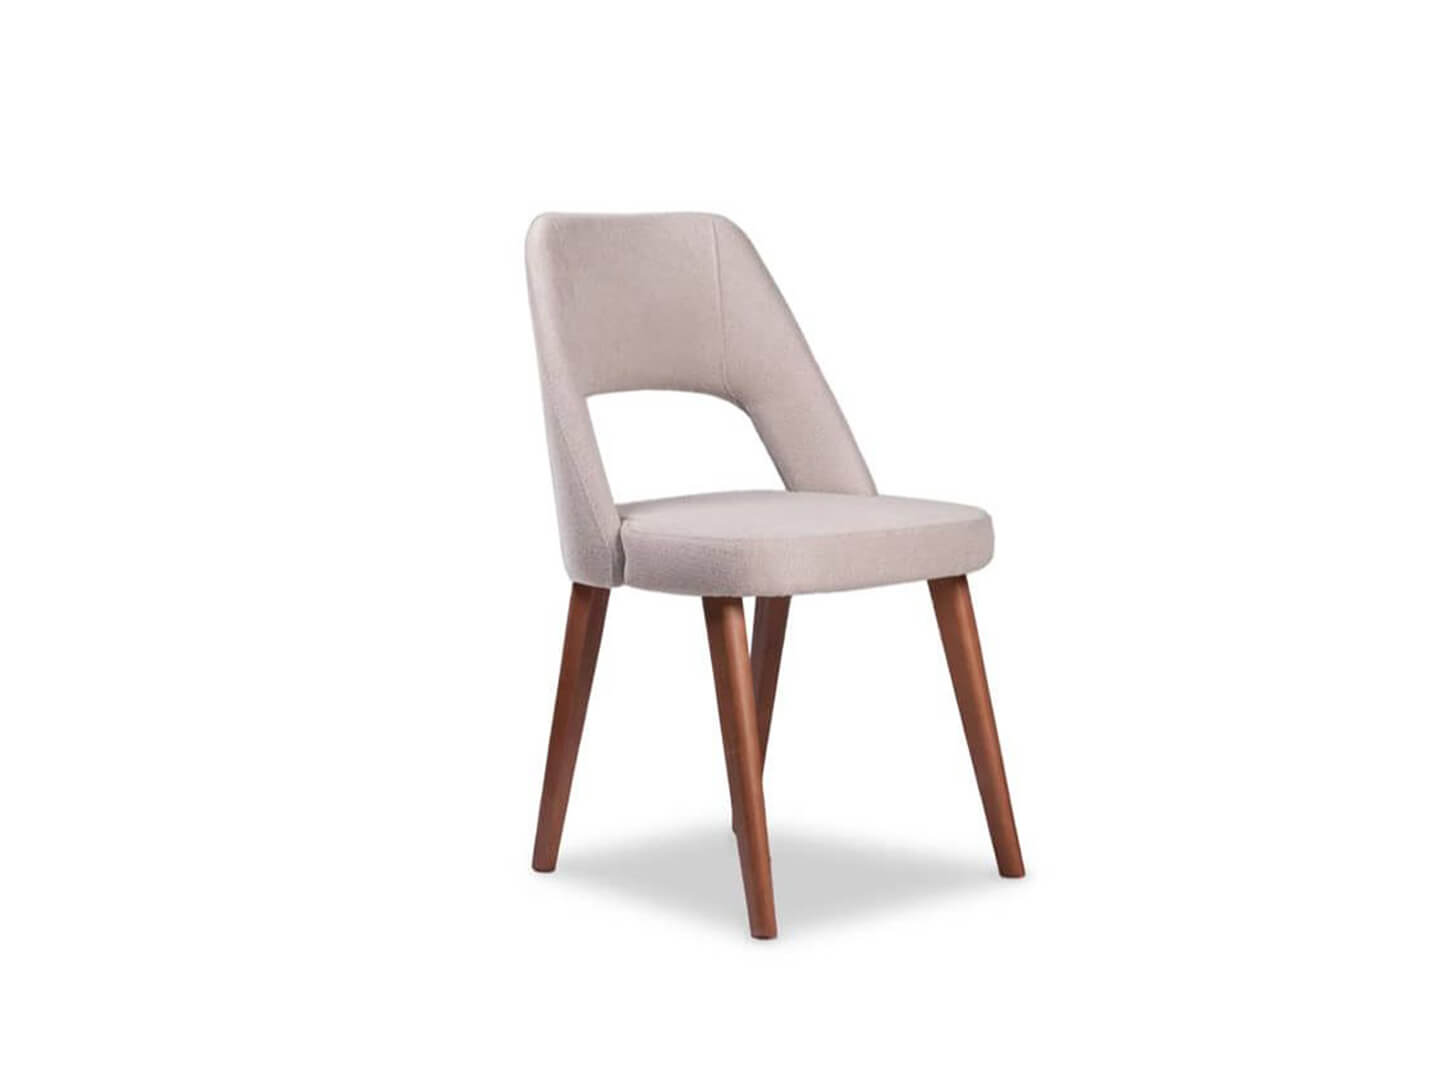 solid wood dining chair OPERA - Lux Furniture